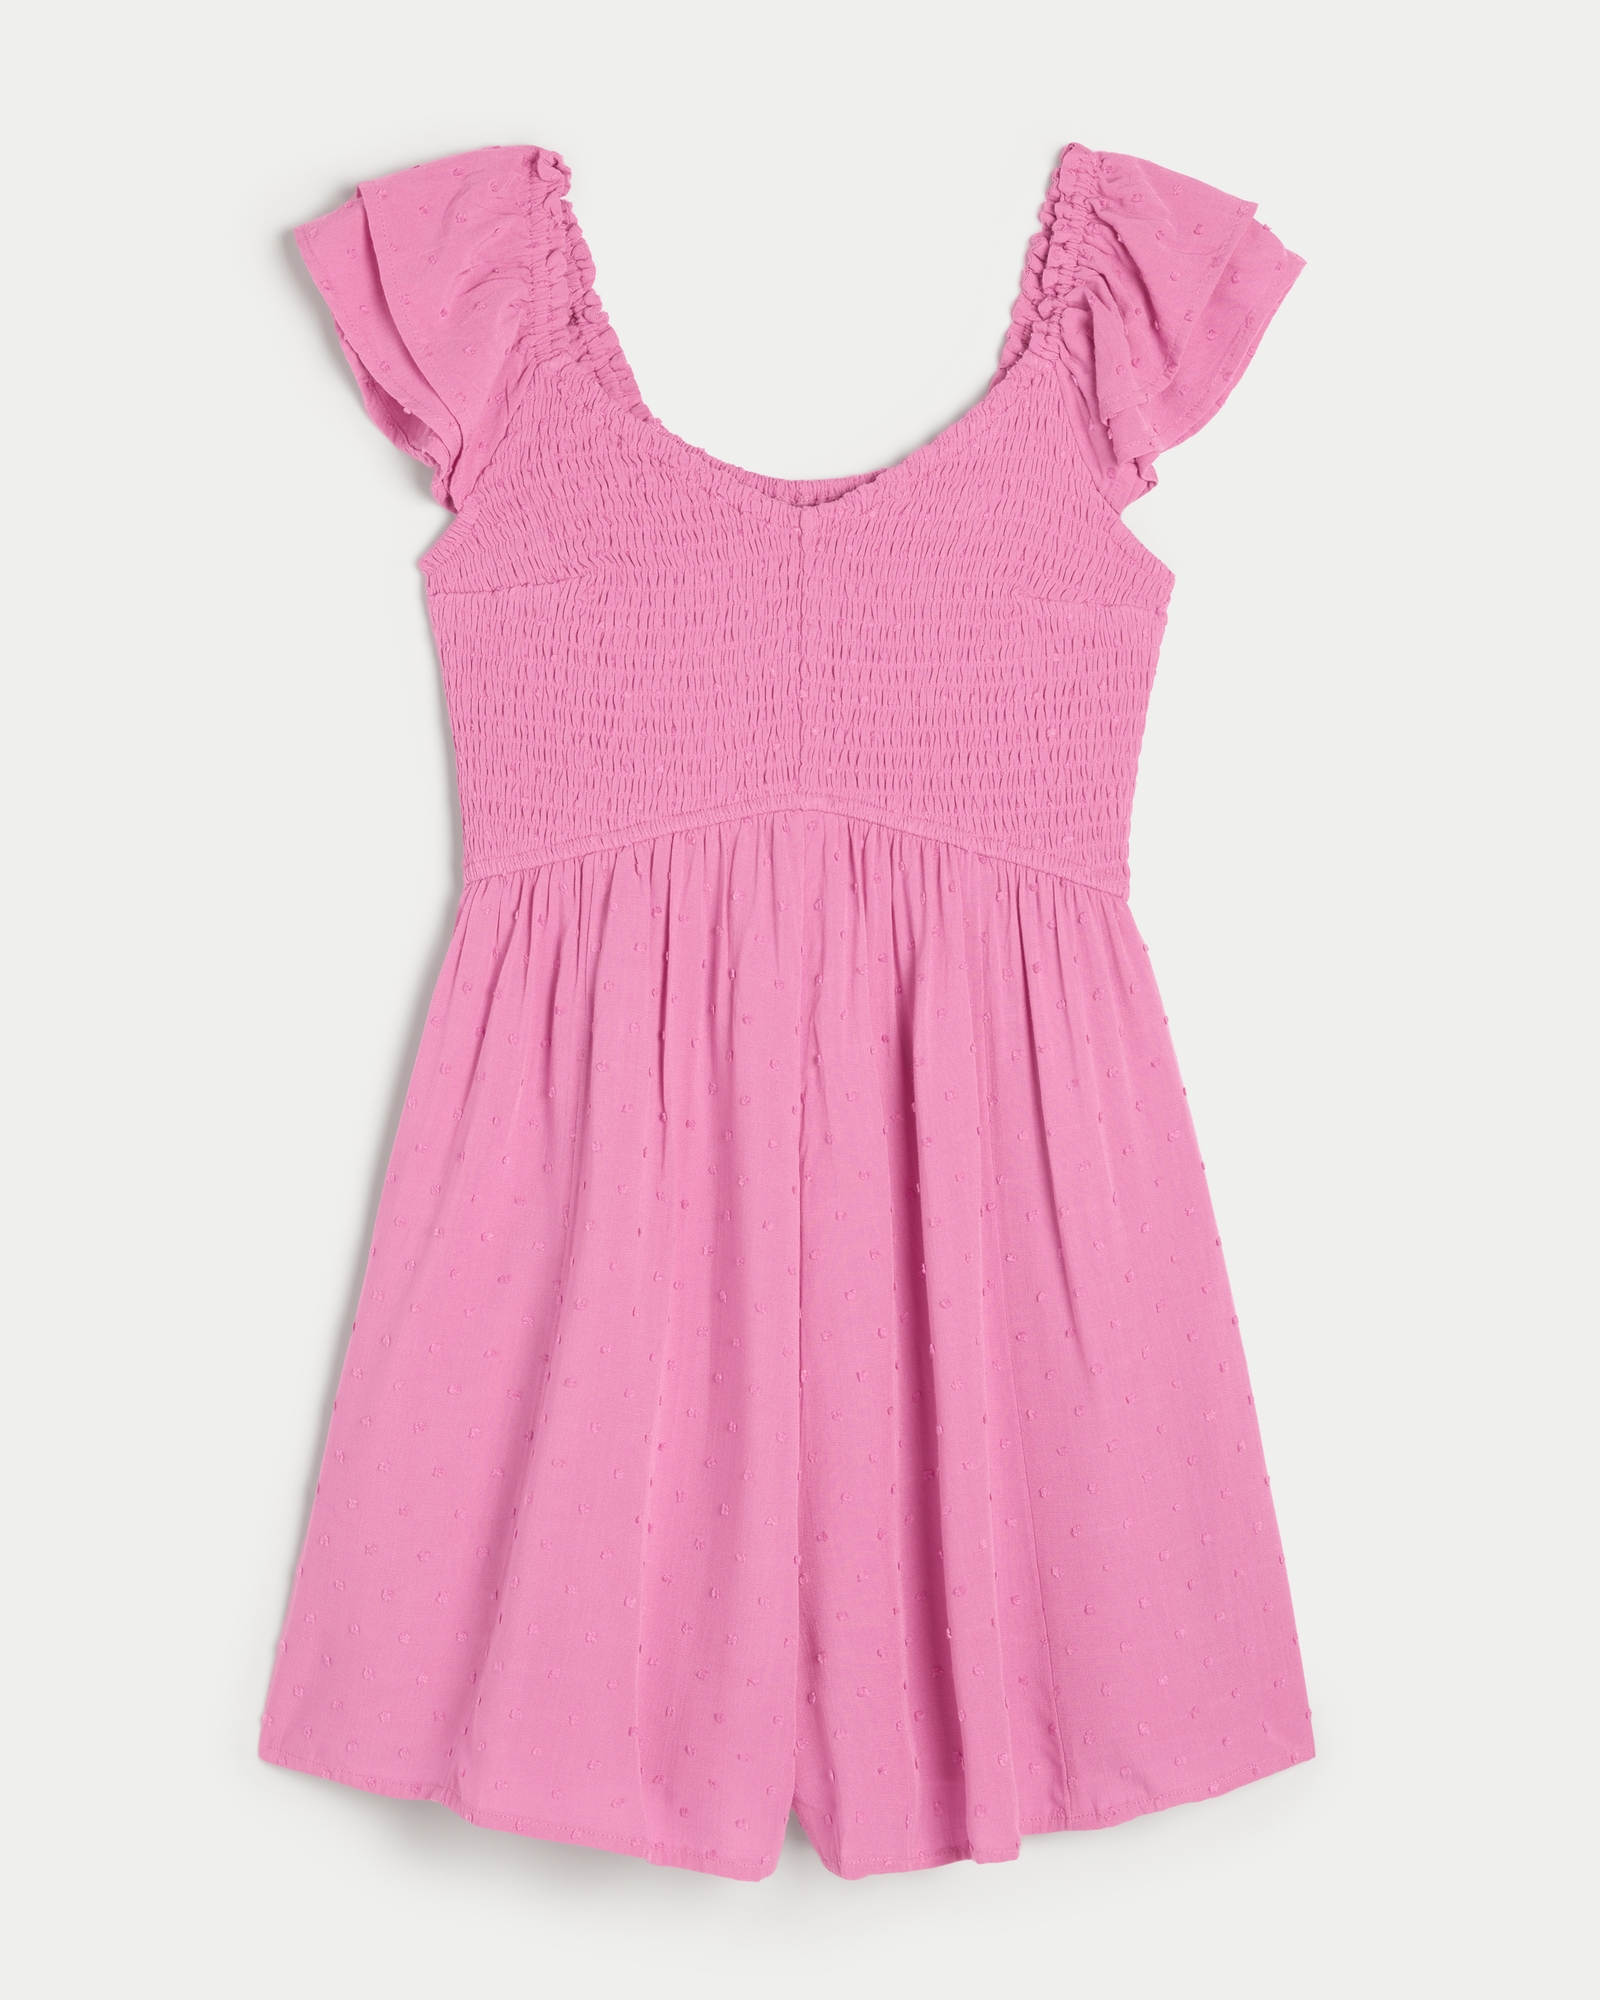 So many new arrivals @aerie! How sweet is this Smocked Keyhole Romper